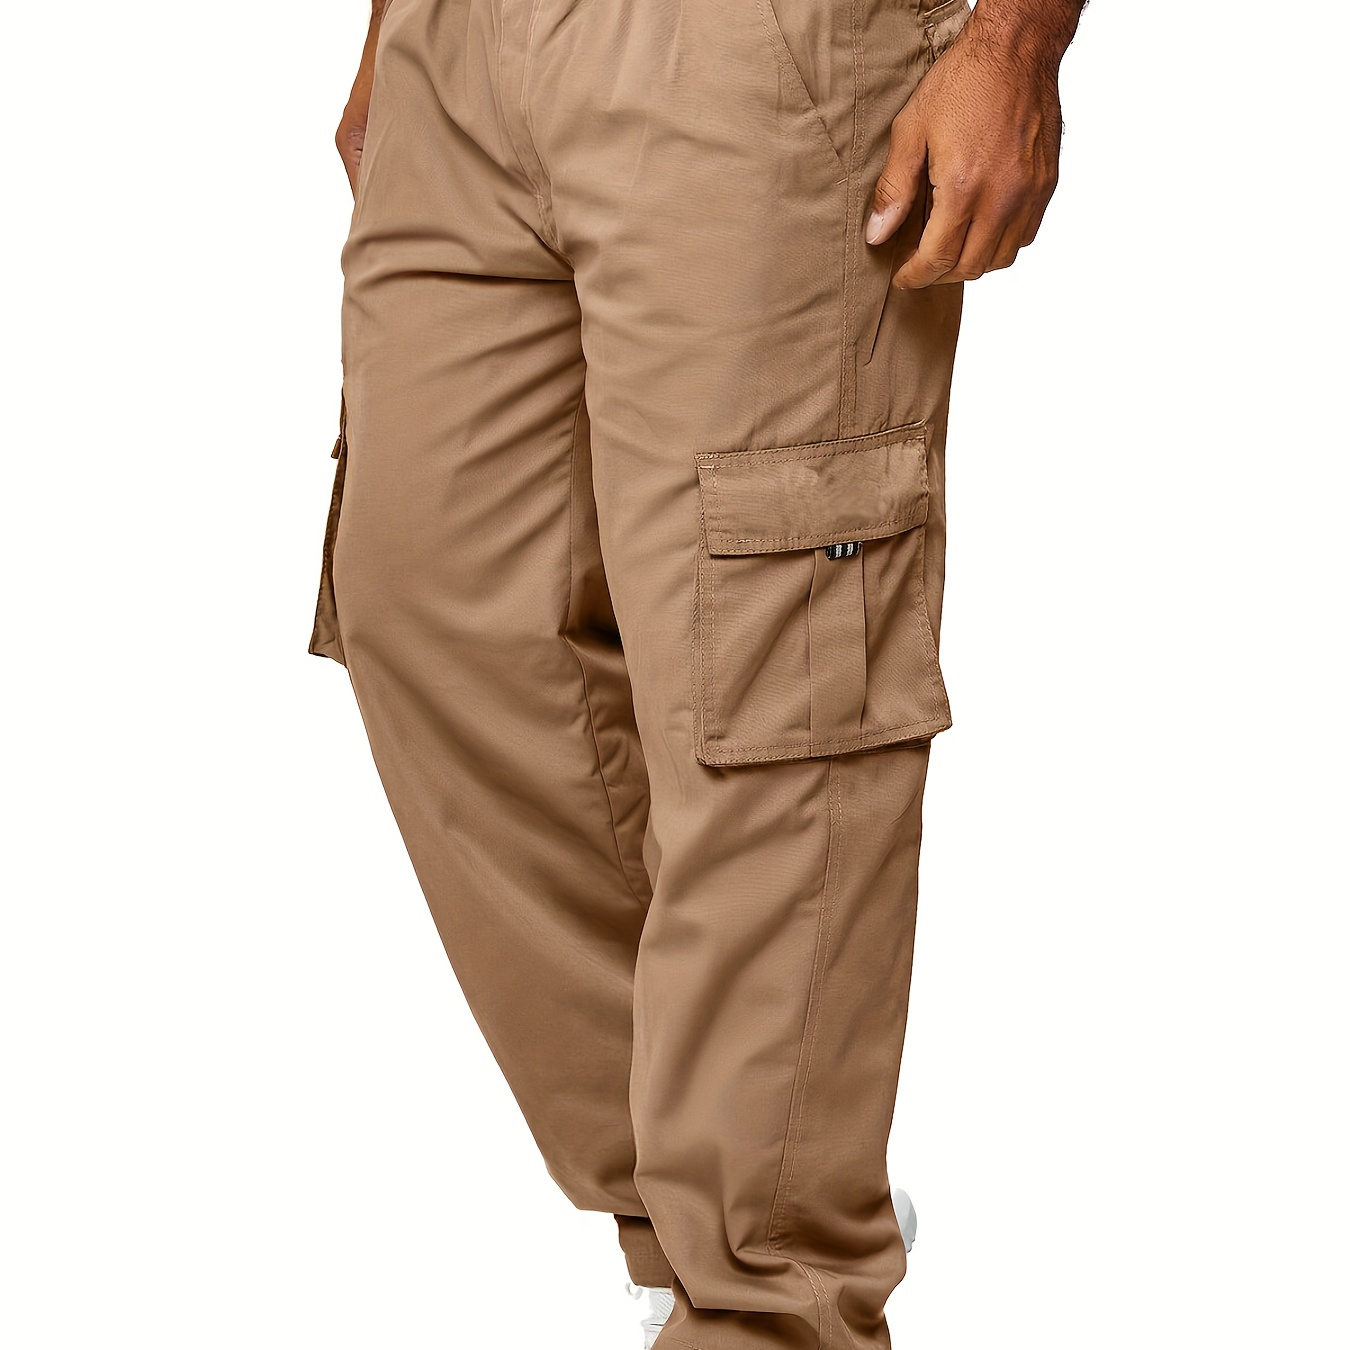 

Men's Cargo Pants Thin Casual Loose Fit Stretch Jogging Pants With Flap Pockets